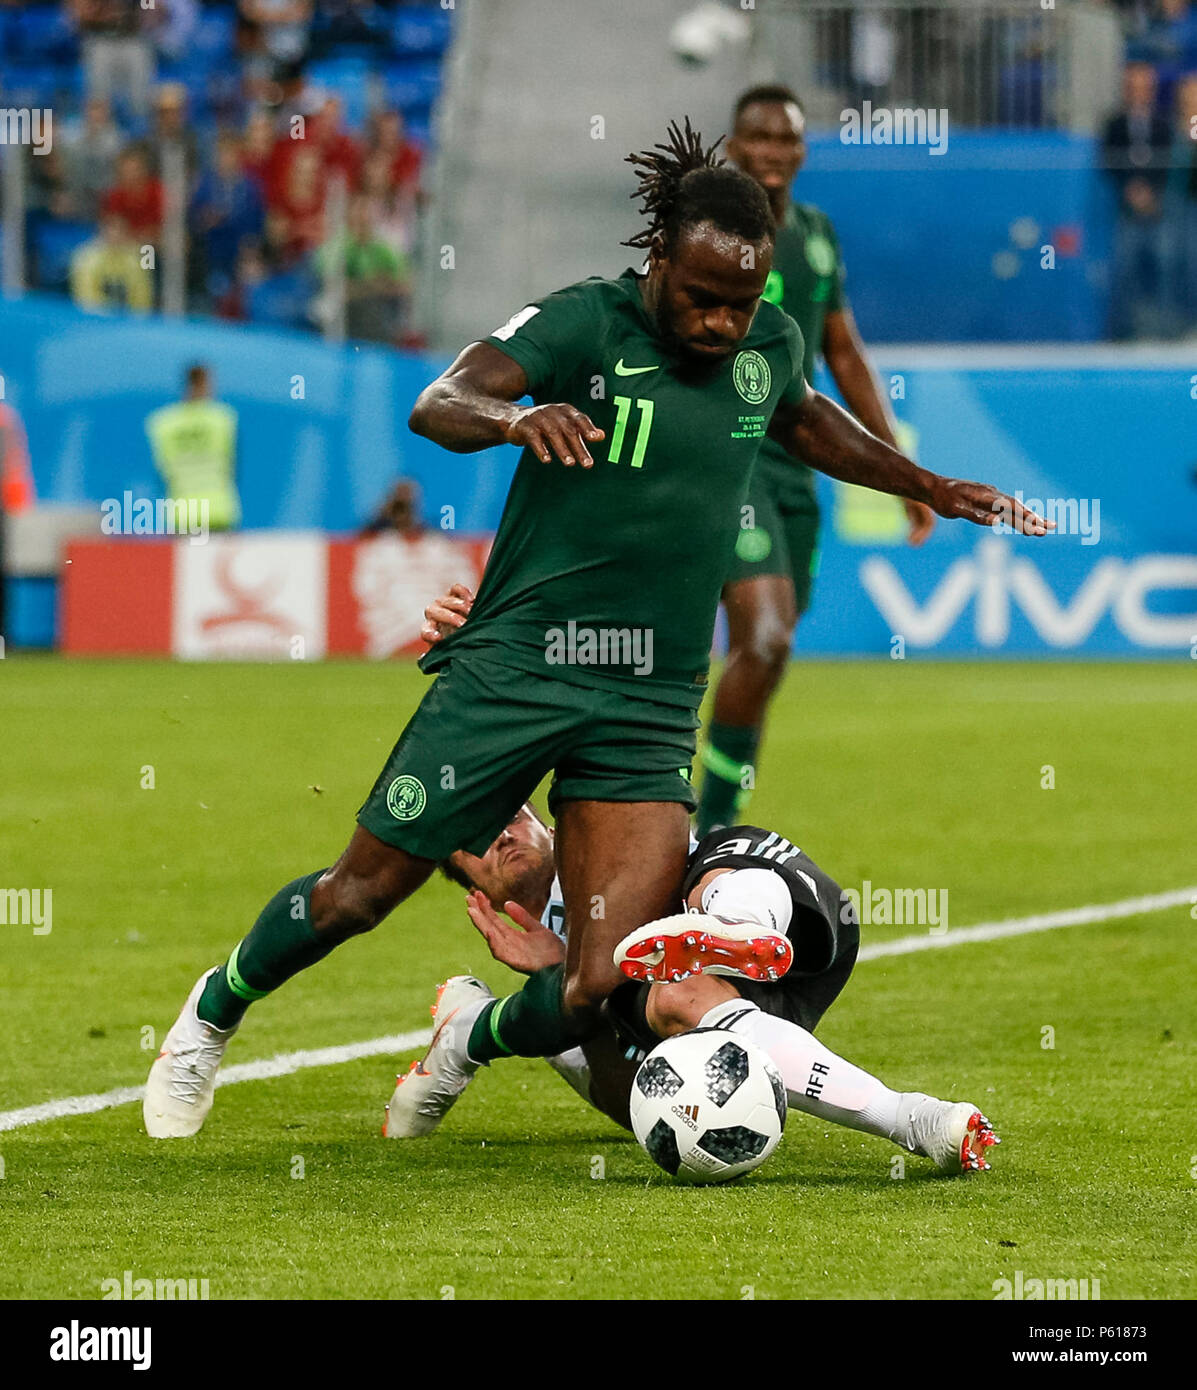 St Petersburg, Russia. 26th Jun, 2018. Victor Moses of Nigeria is tackled by Nicolas Tagliafico of Argentina during the 2018 FIFA World Cup Group D match between Nigeria and Argentina at Saint Petersburg Stadium on June 26th 2018 in Saint Petersburg, Russia. (Photo by Daniel Chesterton/phcimages.com) Credit: PHC Images/Alamy Live News Stock Photo